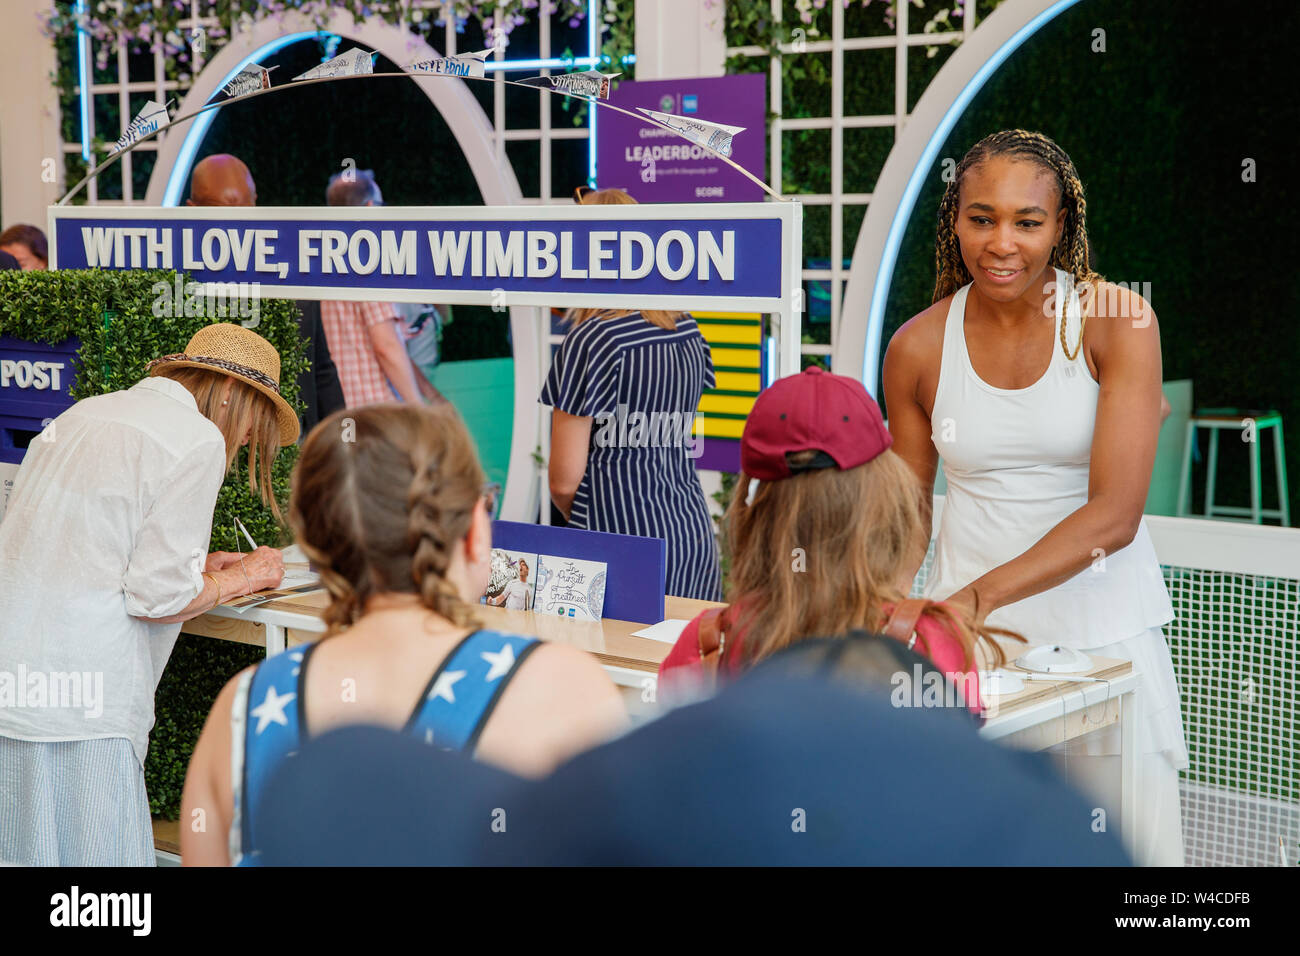 Venus Williams meets fans at The Wimbledon Championships 2019. Held at The All England Lawn Tennis Club, Wimbledon. Stock Photo